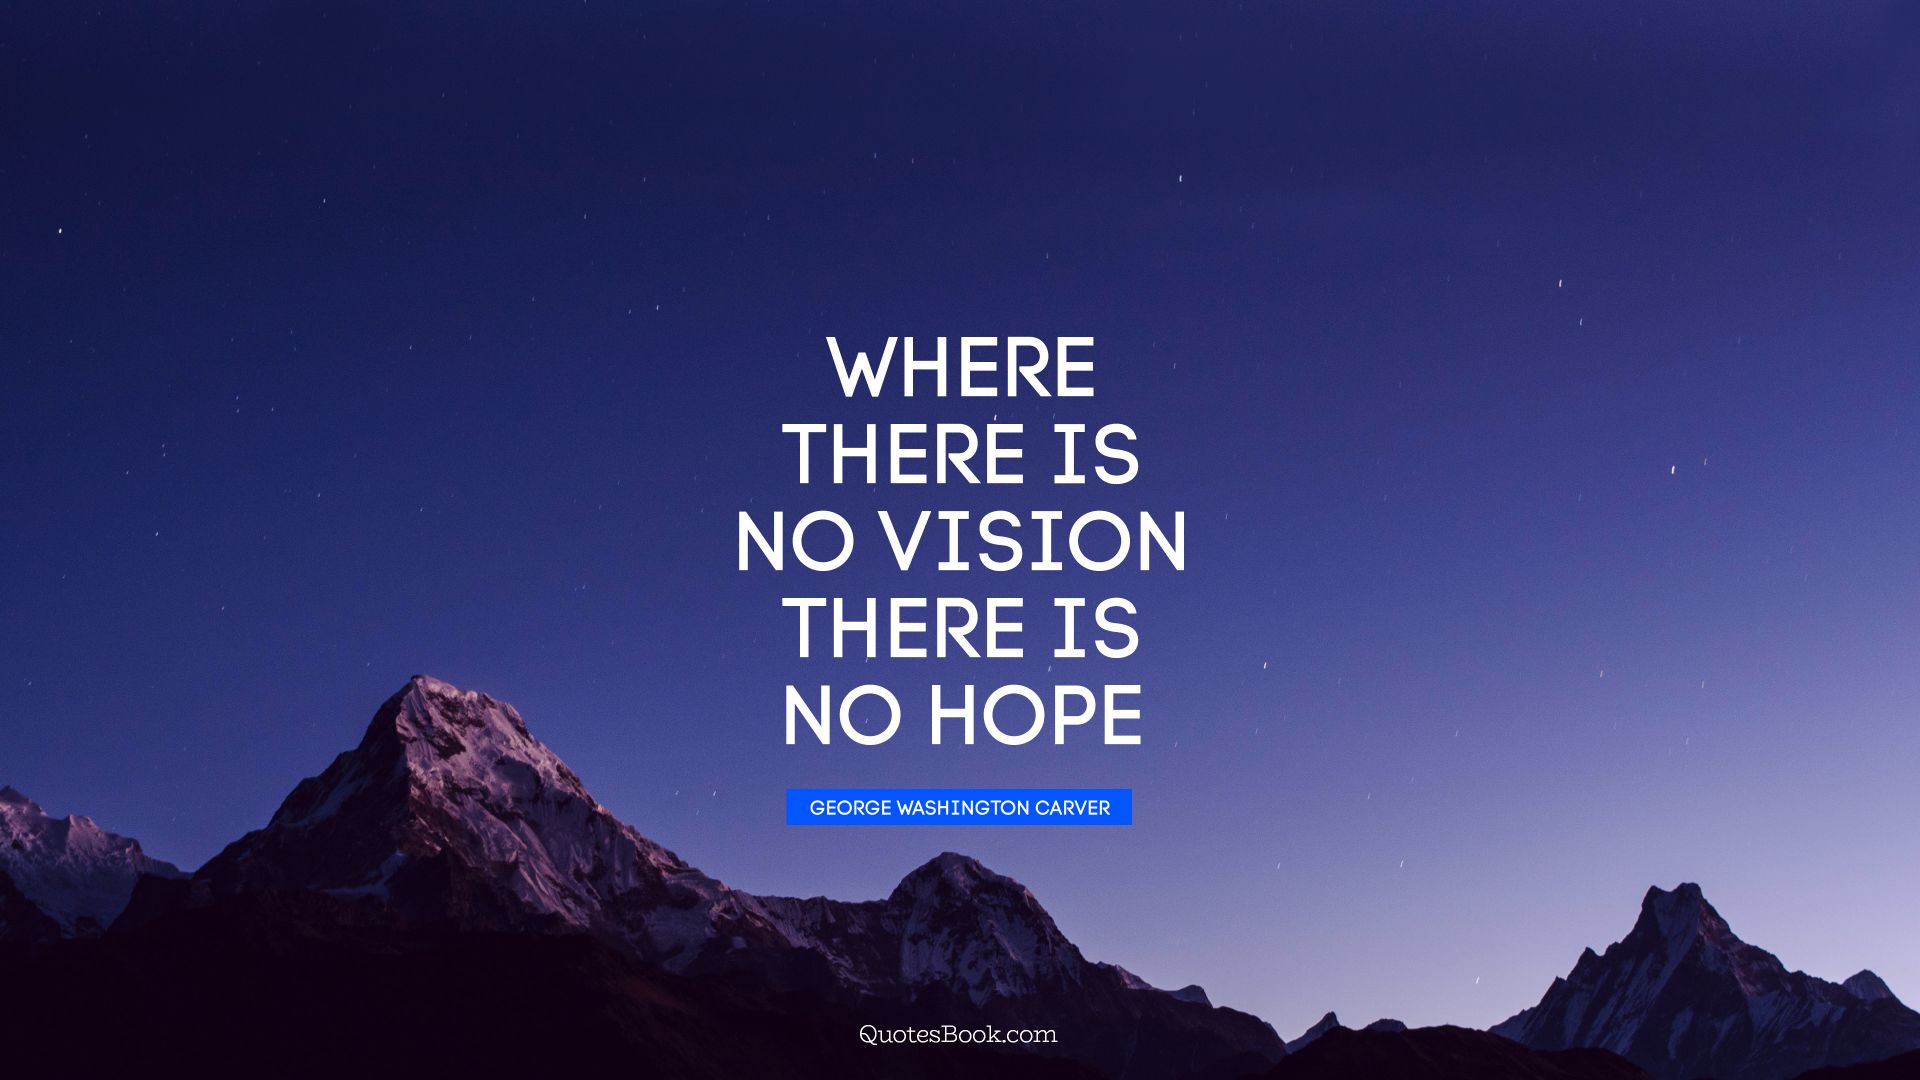 Where there is no vision there is no hope. - Quote by George Washington Carver